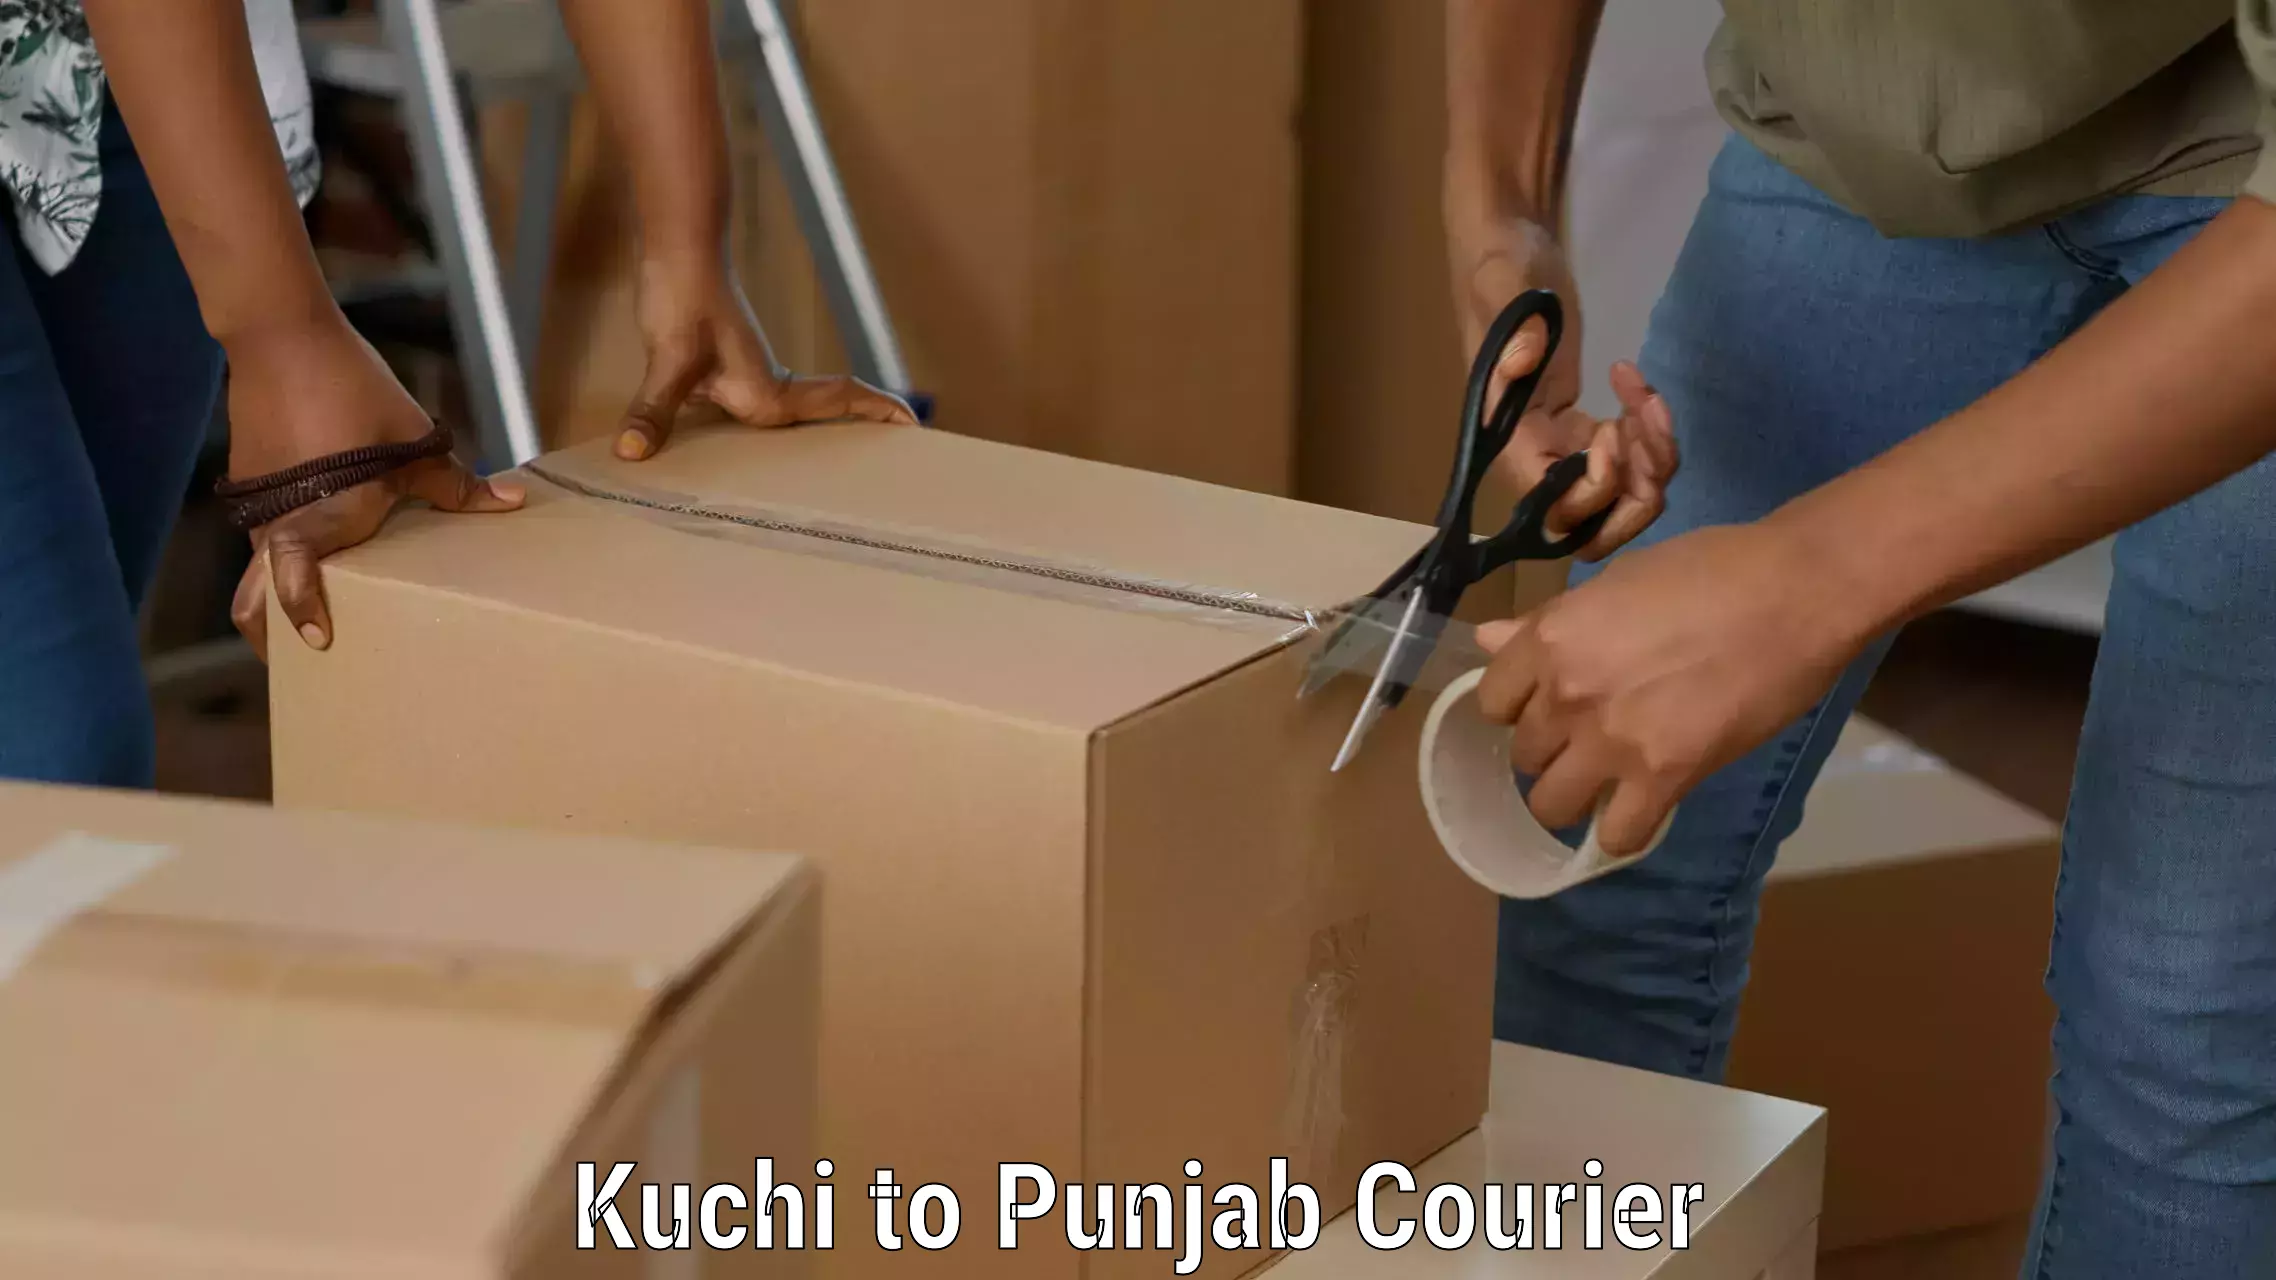 Tailored delivery services Kuchi to Punjab